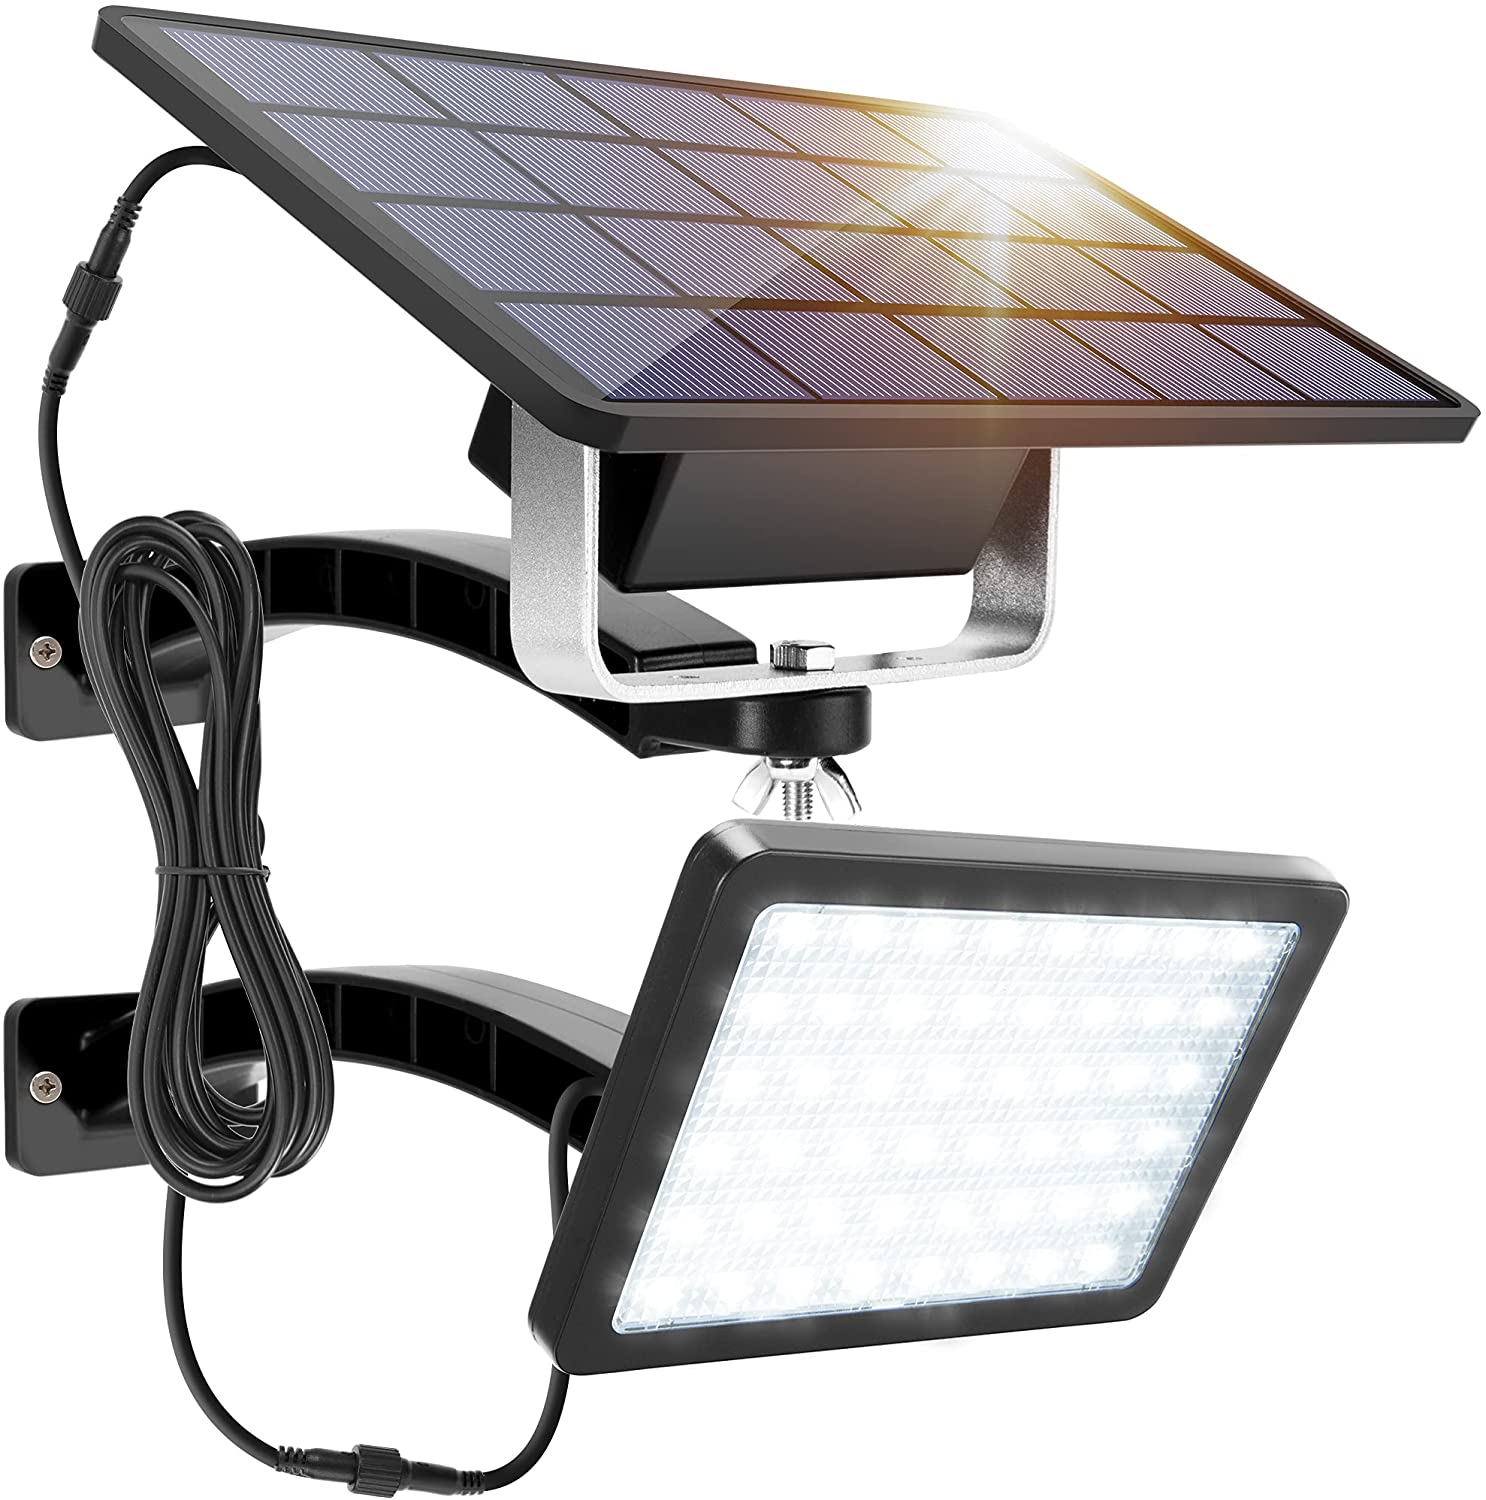 Solar-Powered Gadgets for Outdoor Enthusiasts